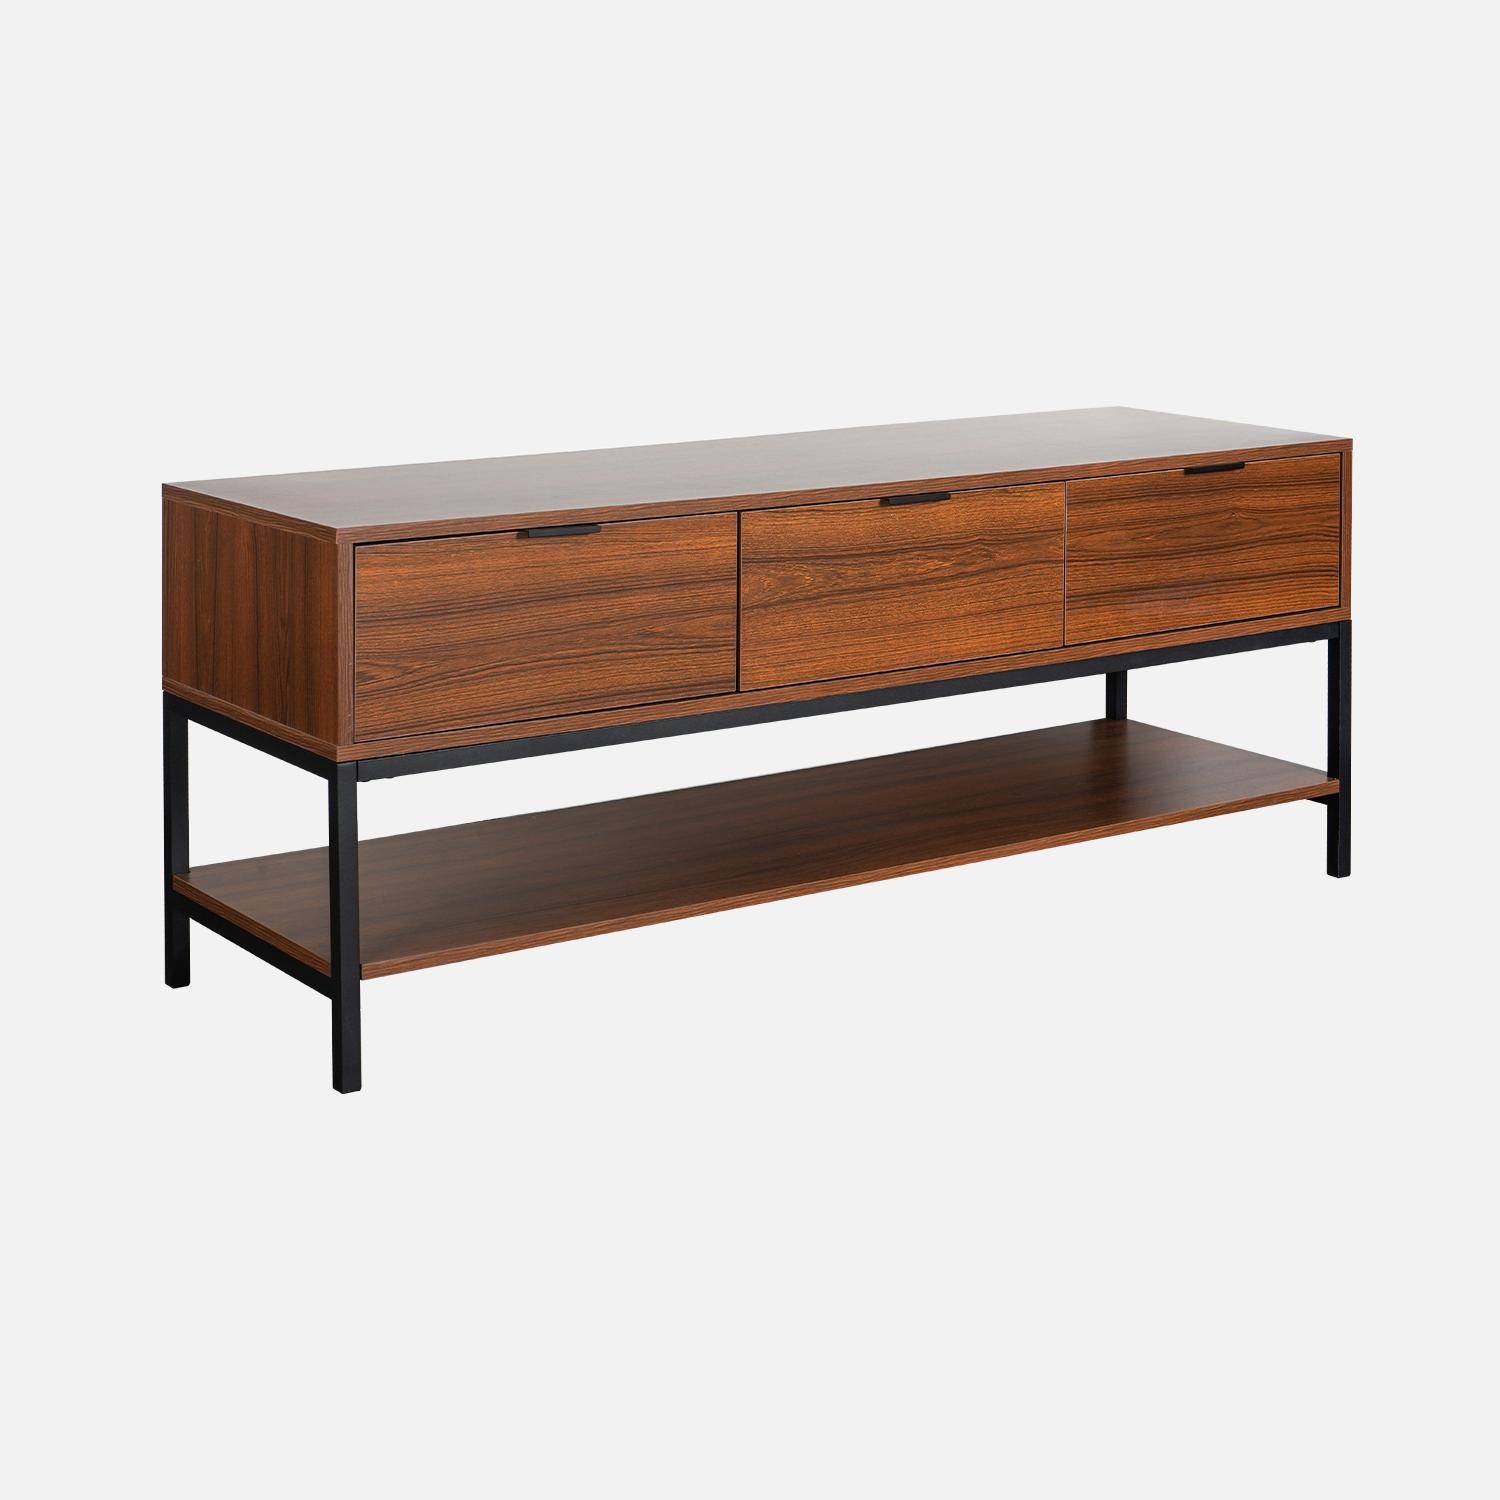 TV unit in walnut with black metal base and handles - 3 drawers and 1 lower shelf,sweeek,Photo3